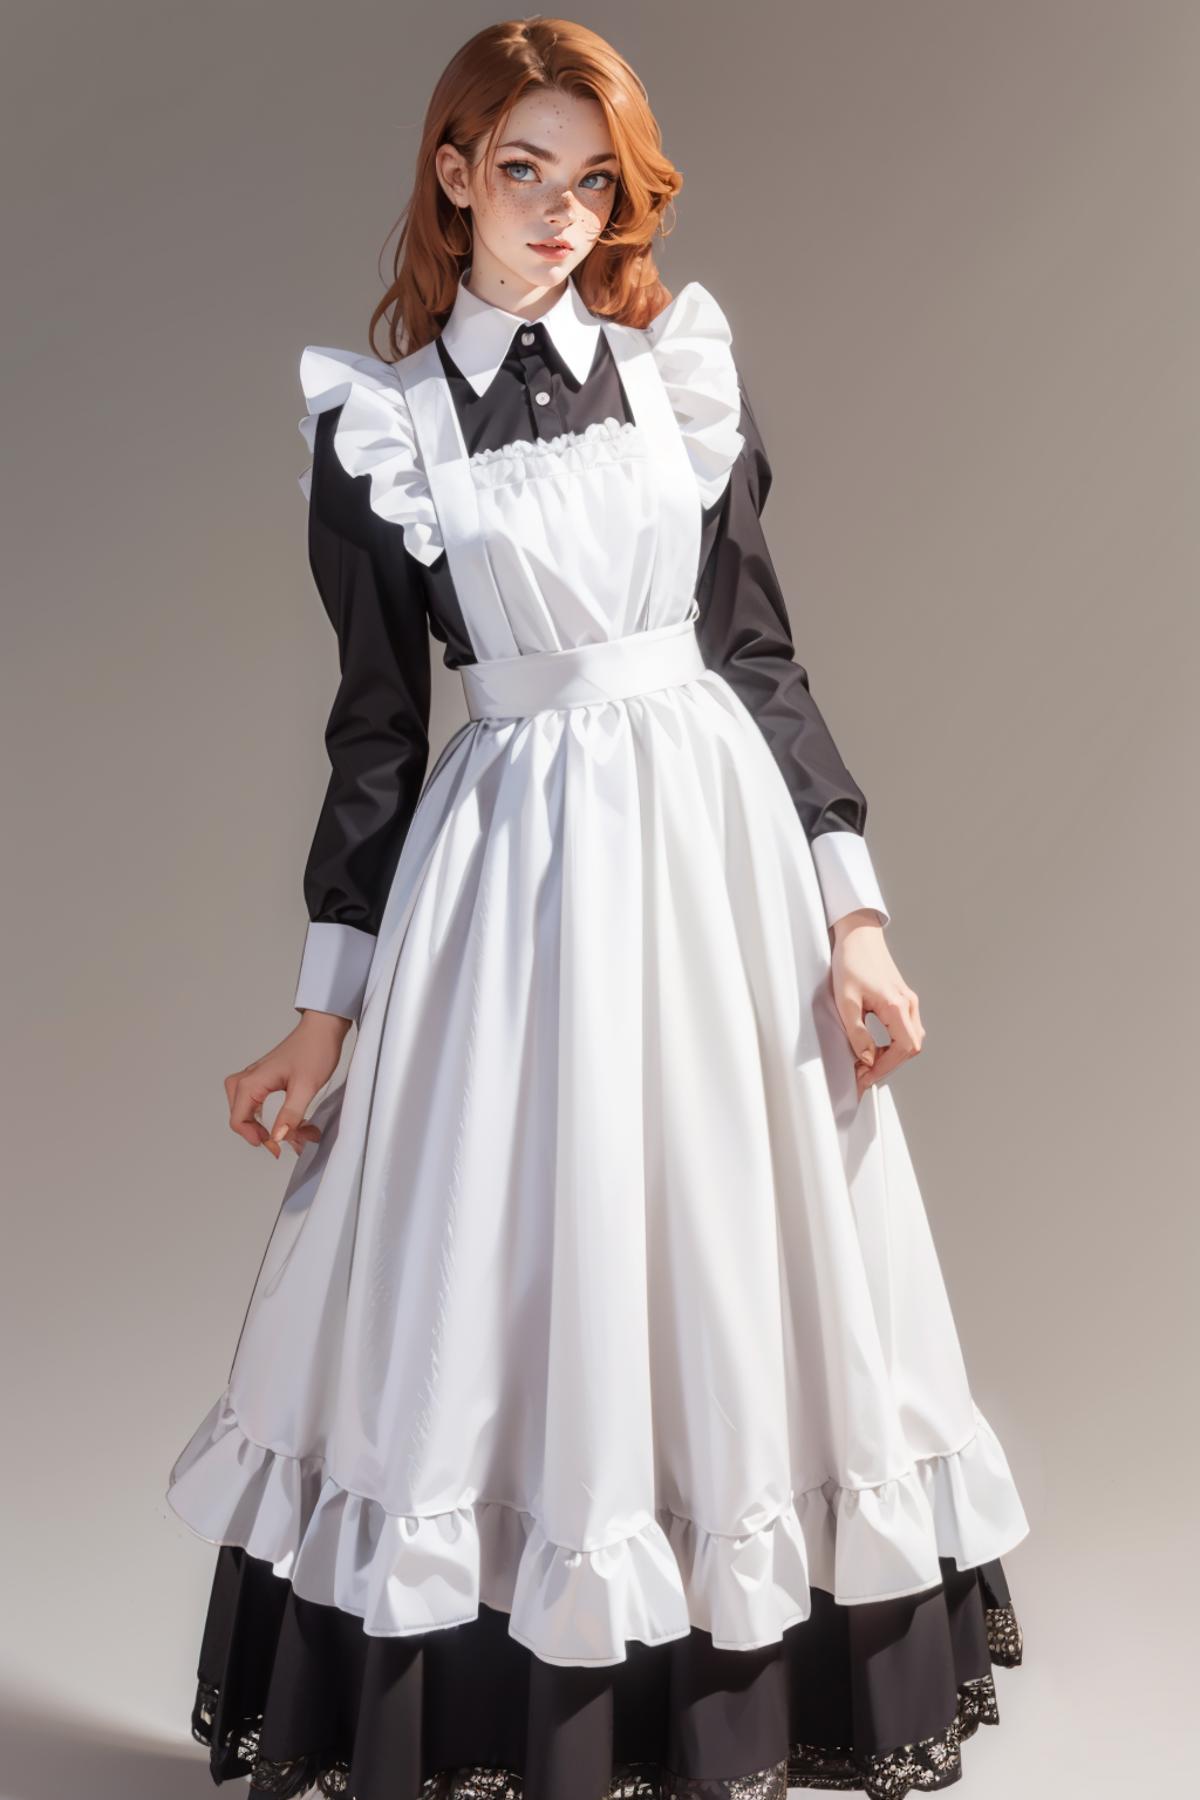 A Female Doll Modeling a White Dress with a Black Collar